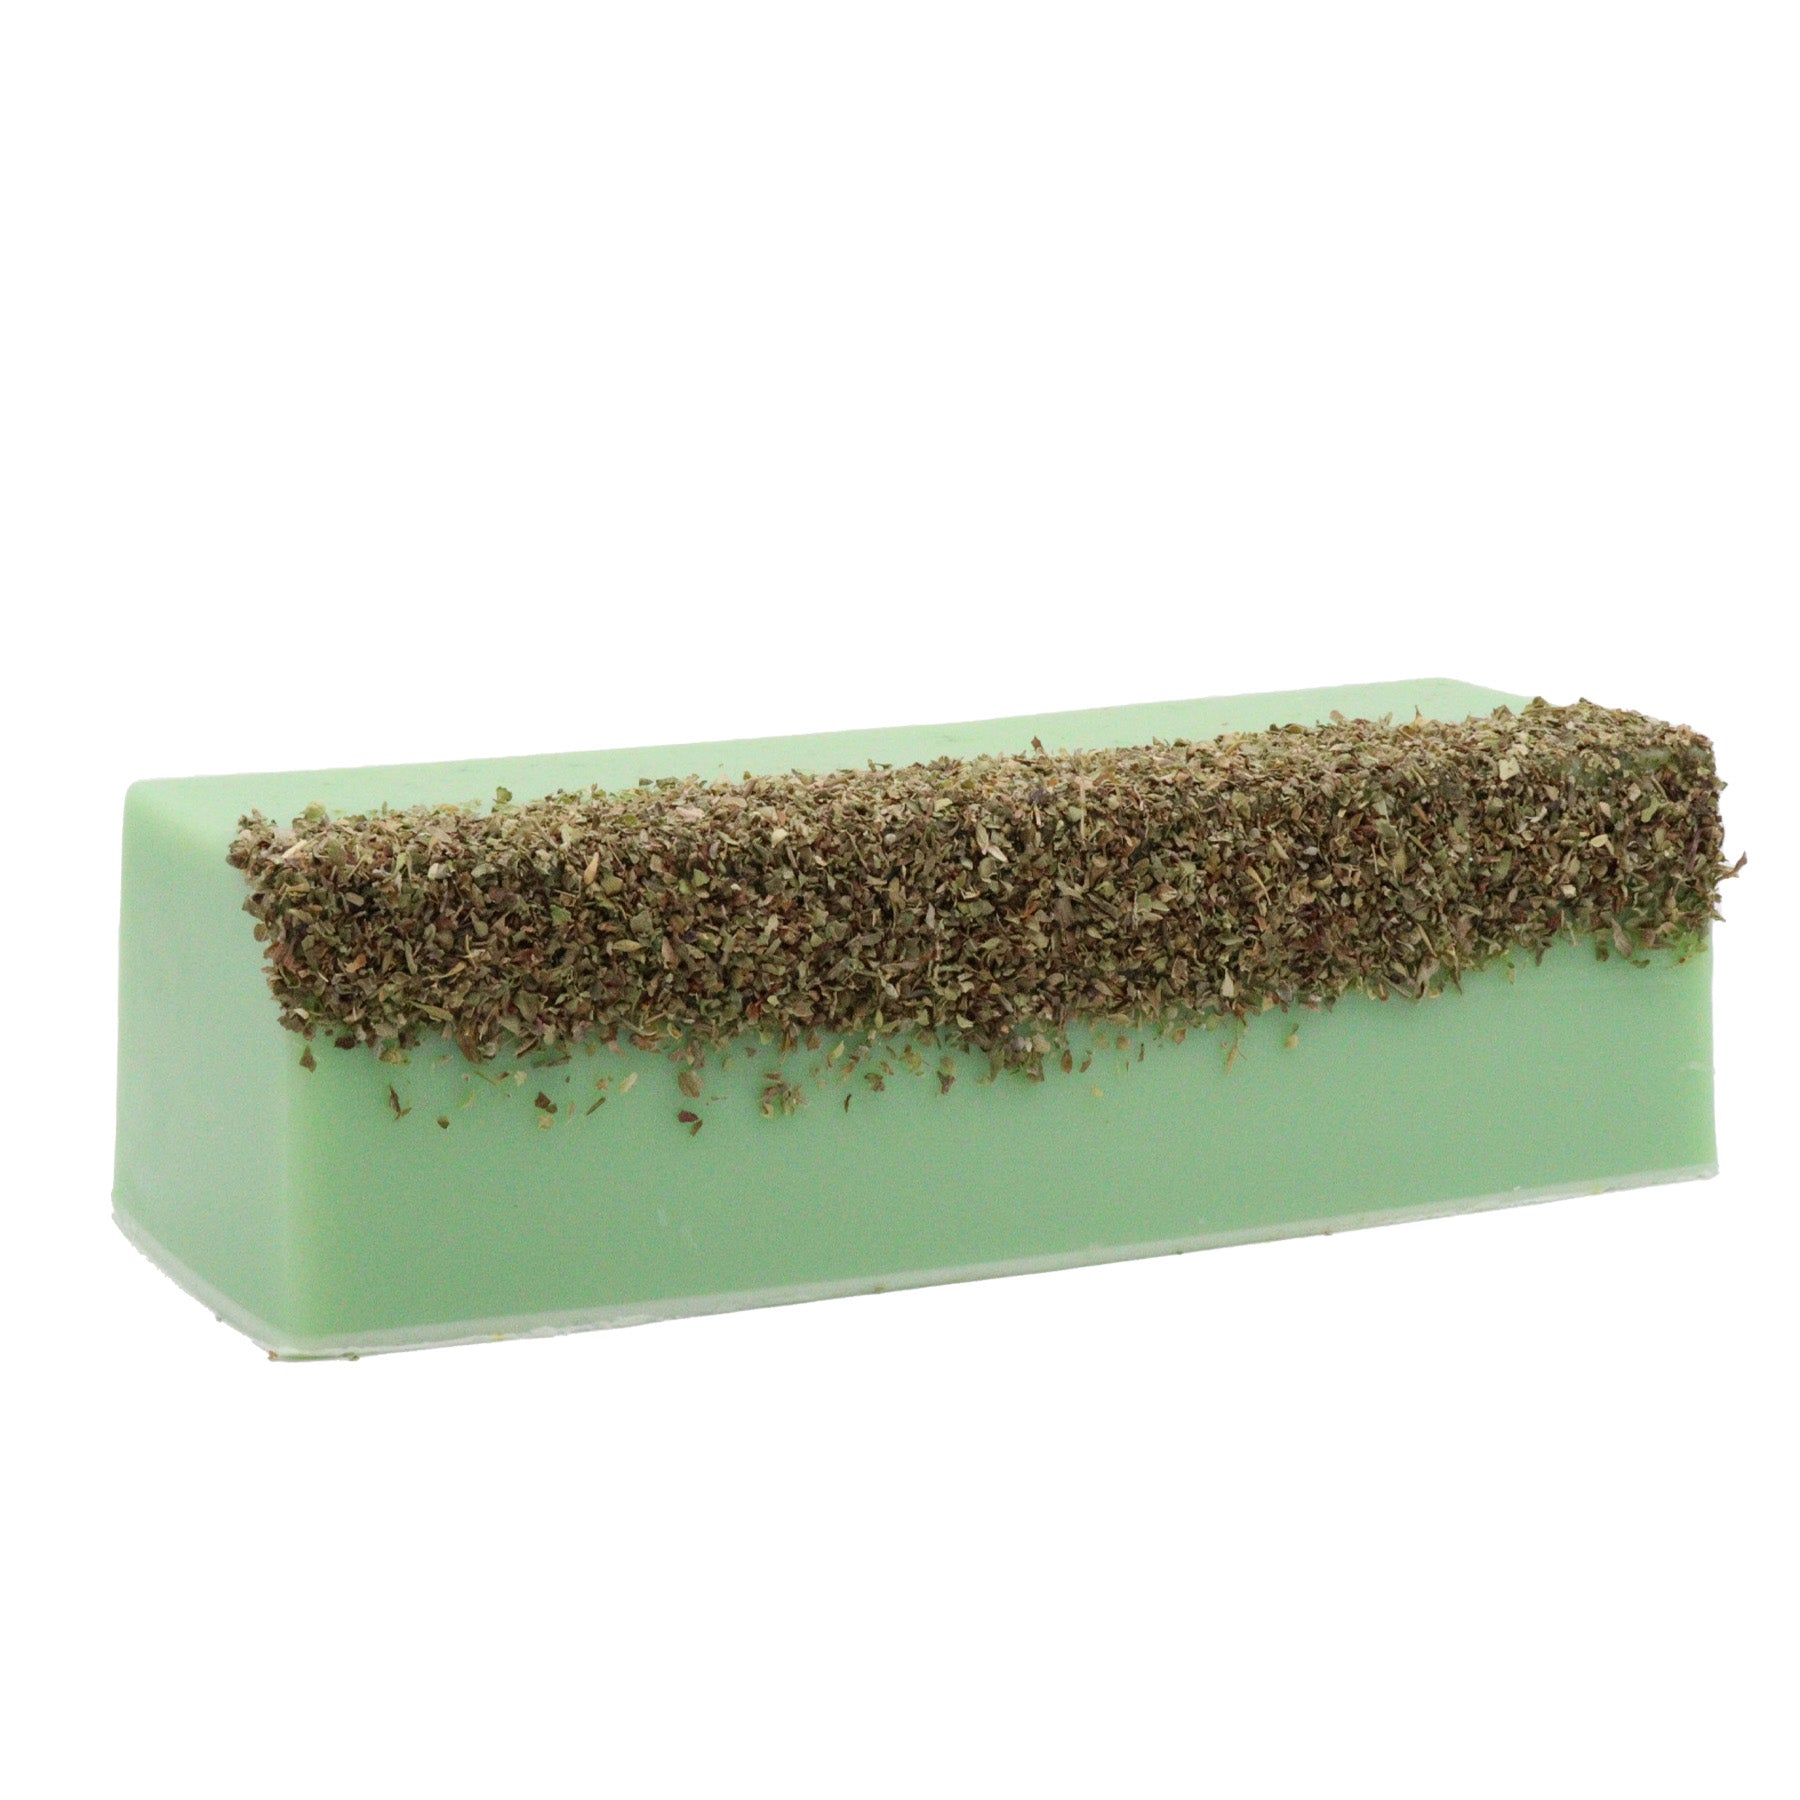 View Revitalising Herbal Remedy Soap Loaf information